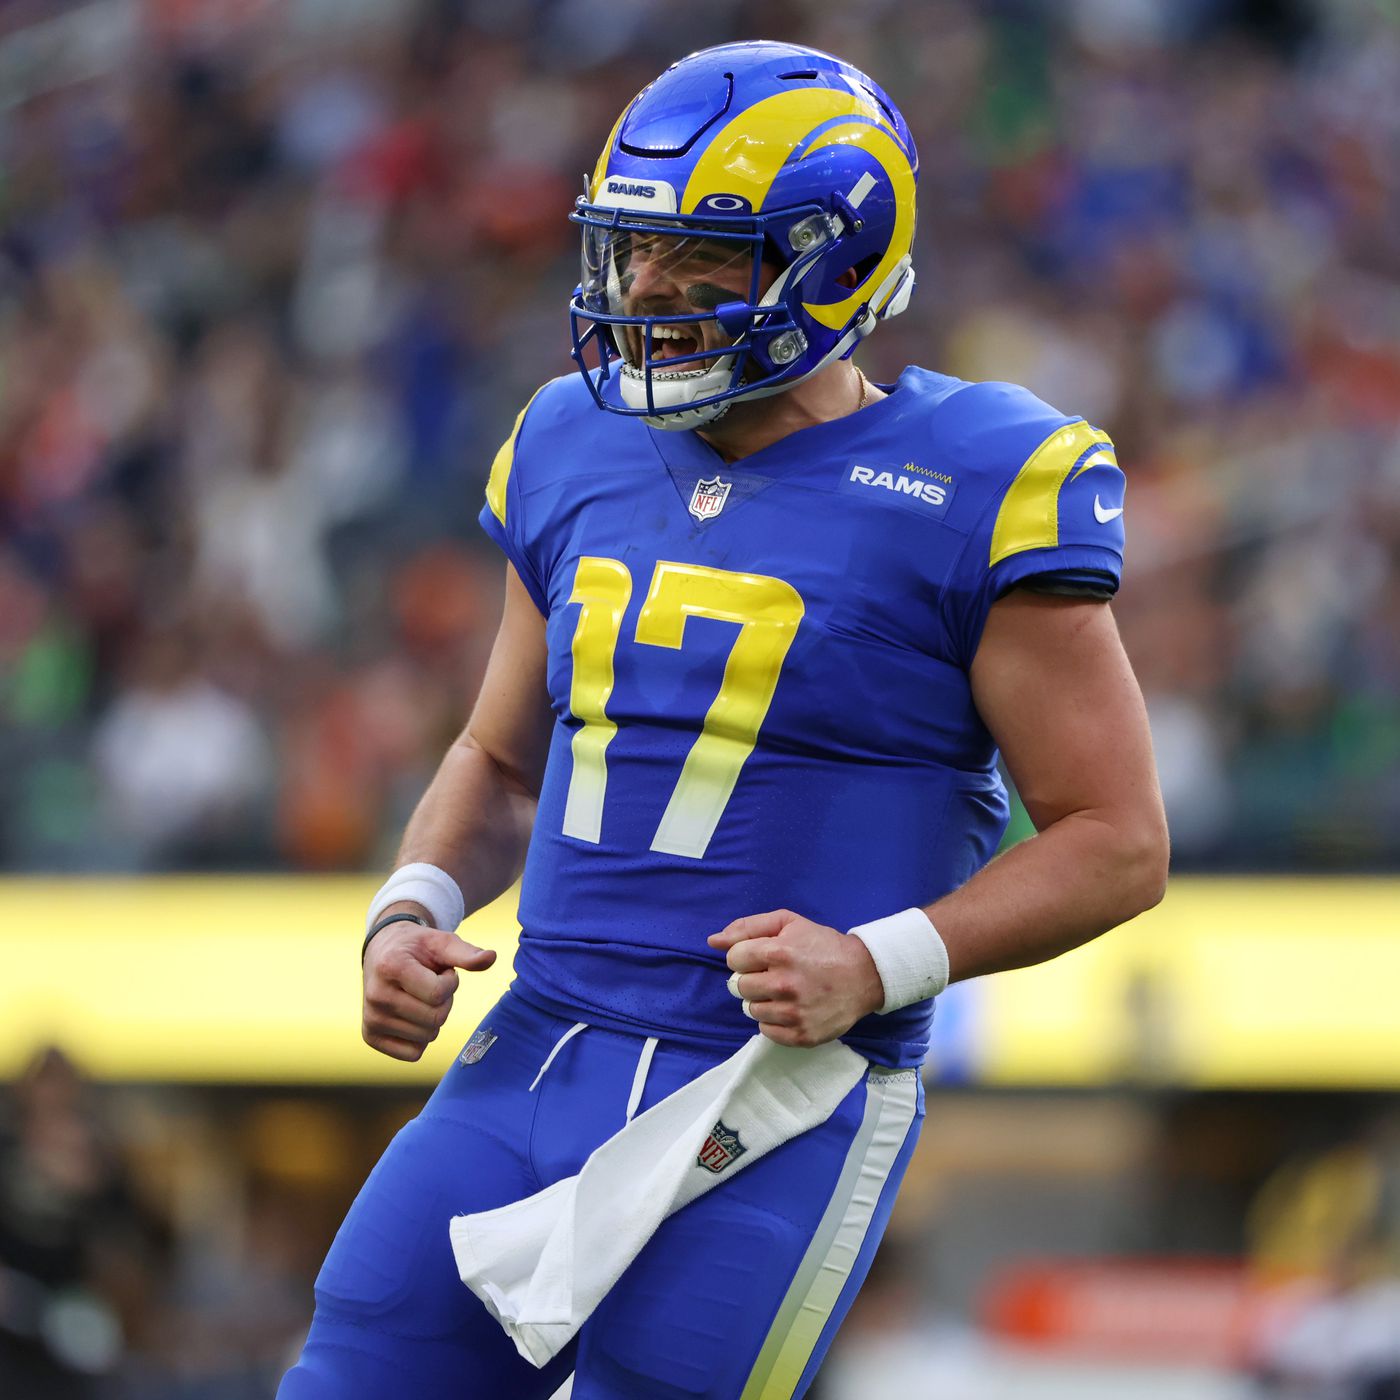 Rams-Chargers Week 17 odds: Baker Mayfield back to being an underdog - Turf  Show Times